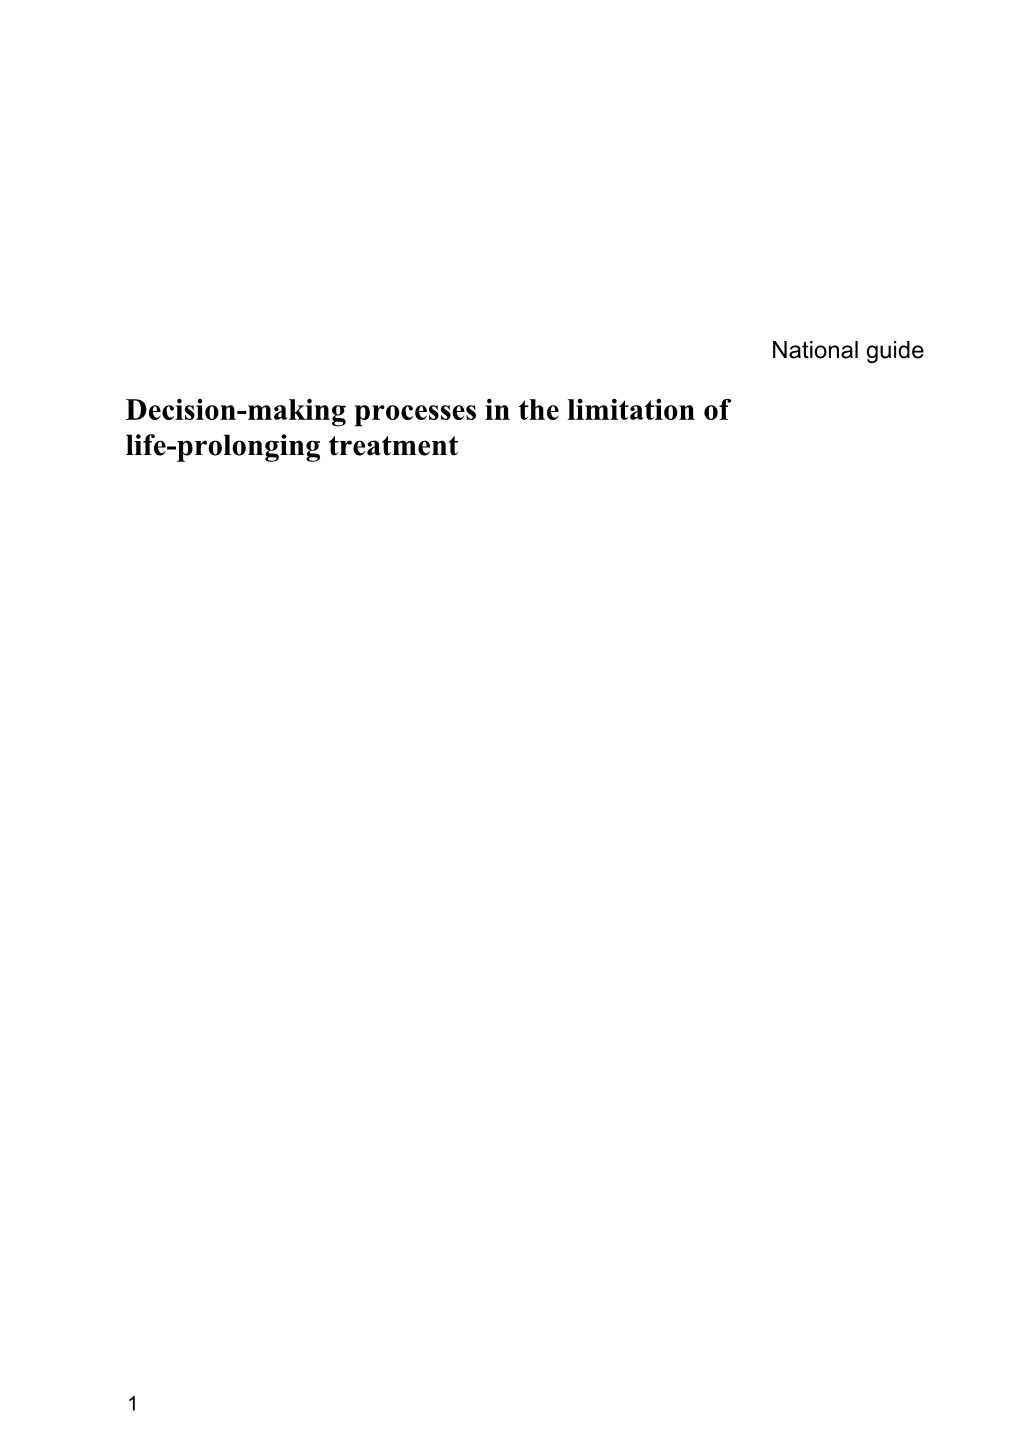 Publication Title: Decision-Making Processes in the Limitation of Life-Prolonging Treatment